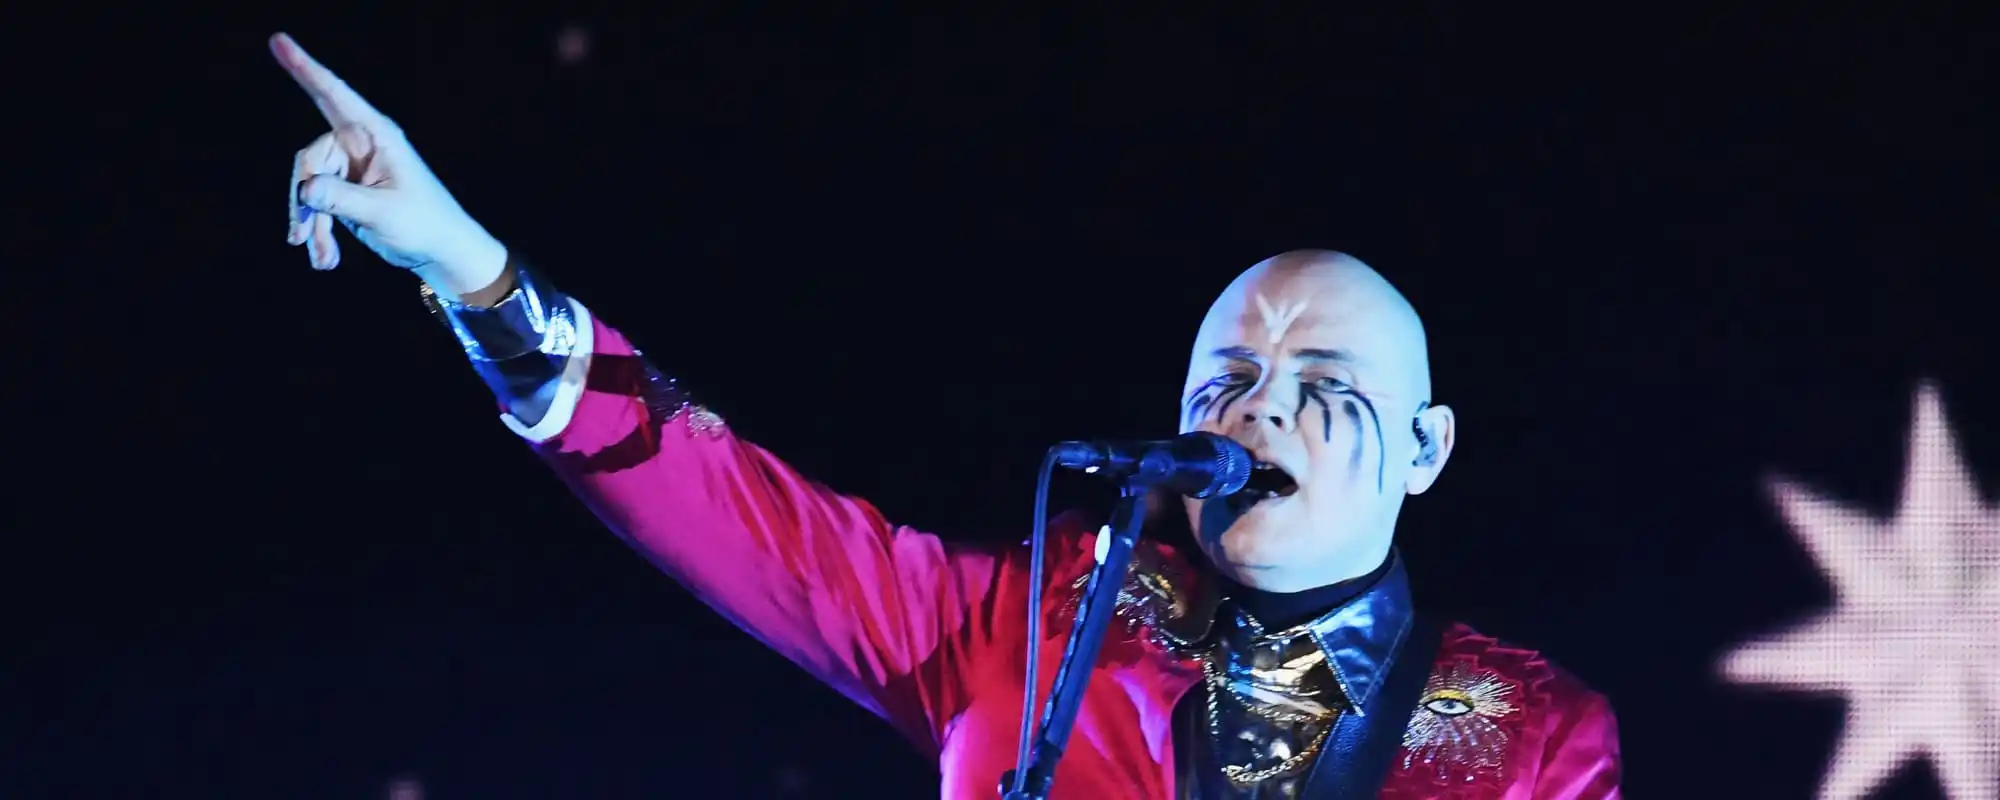 Billy Corgan, P*rno For Pyros Take on Led Zeppelin’s “When the Levee Breaks” at Lollapalooza